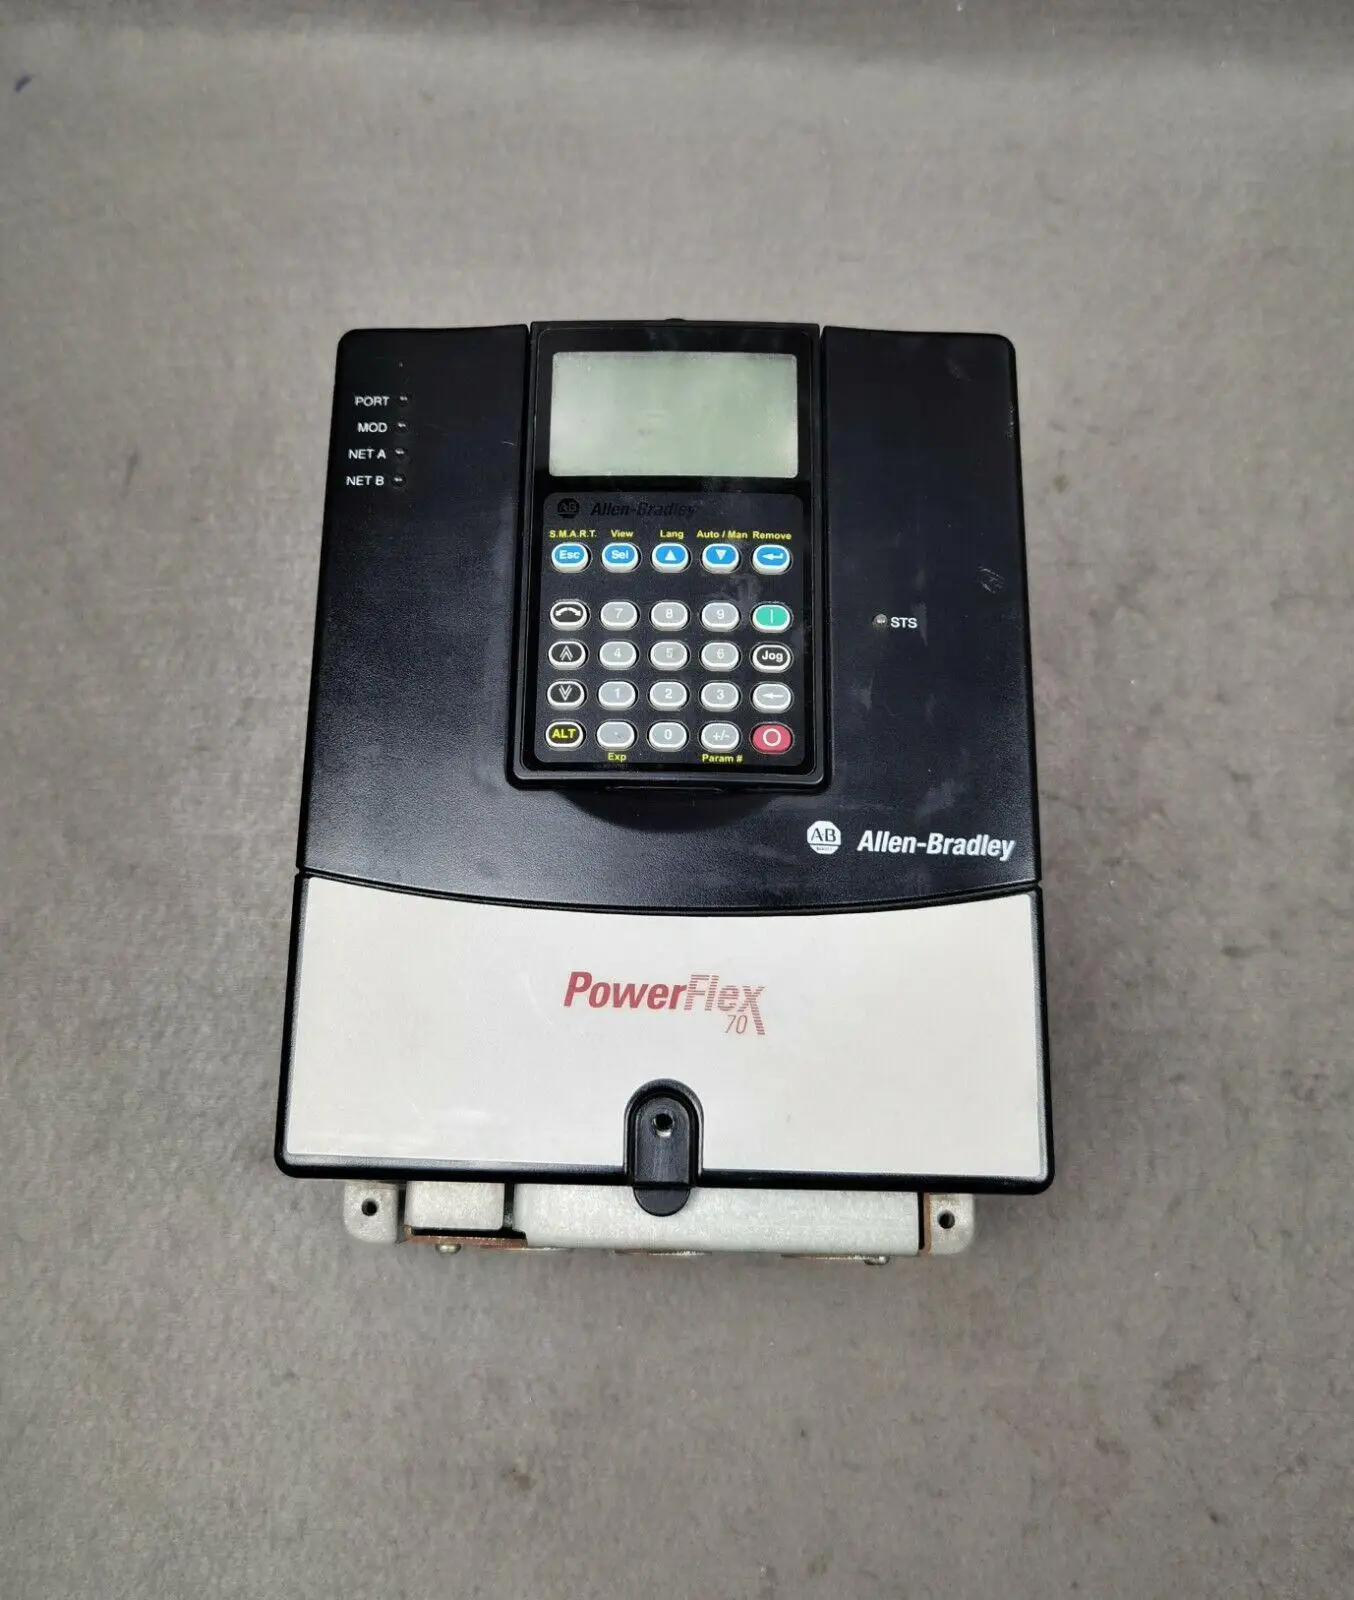 Used 20AC8P7A0AYNANC0 PowerFlex 70 (Tested Cleaned) in stock